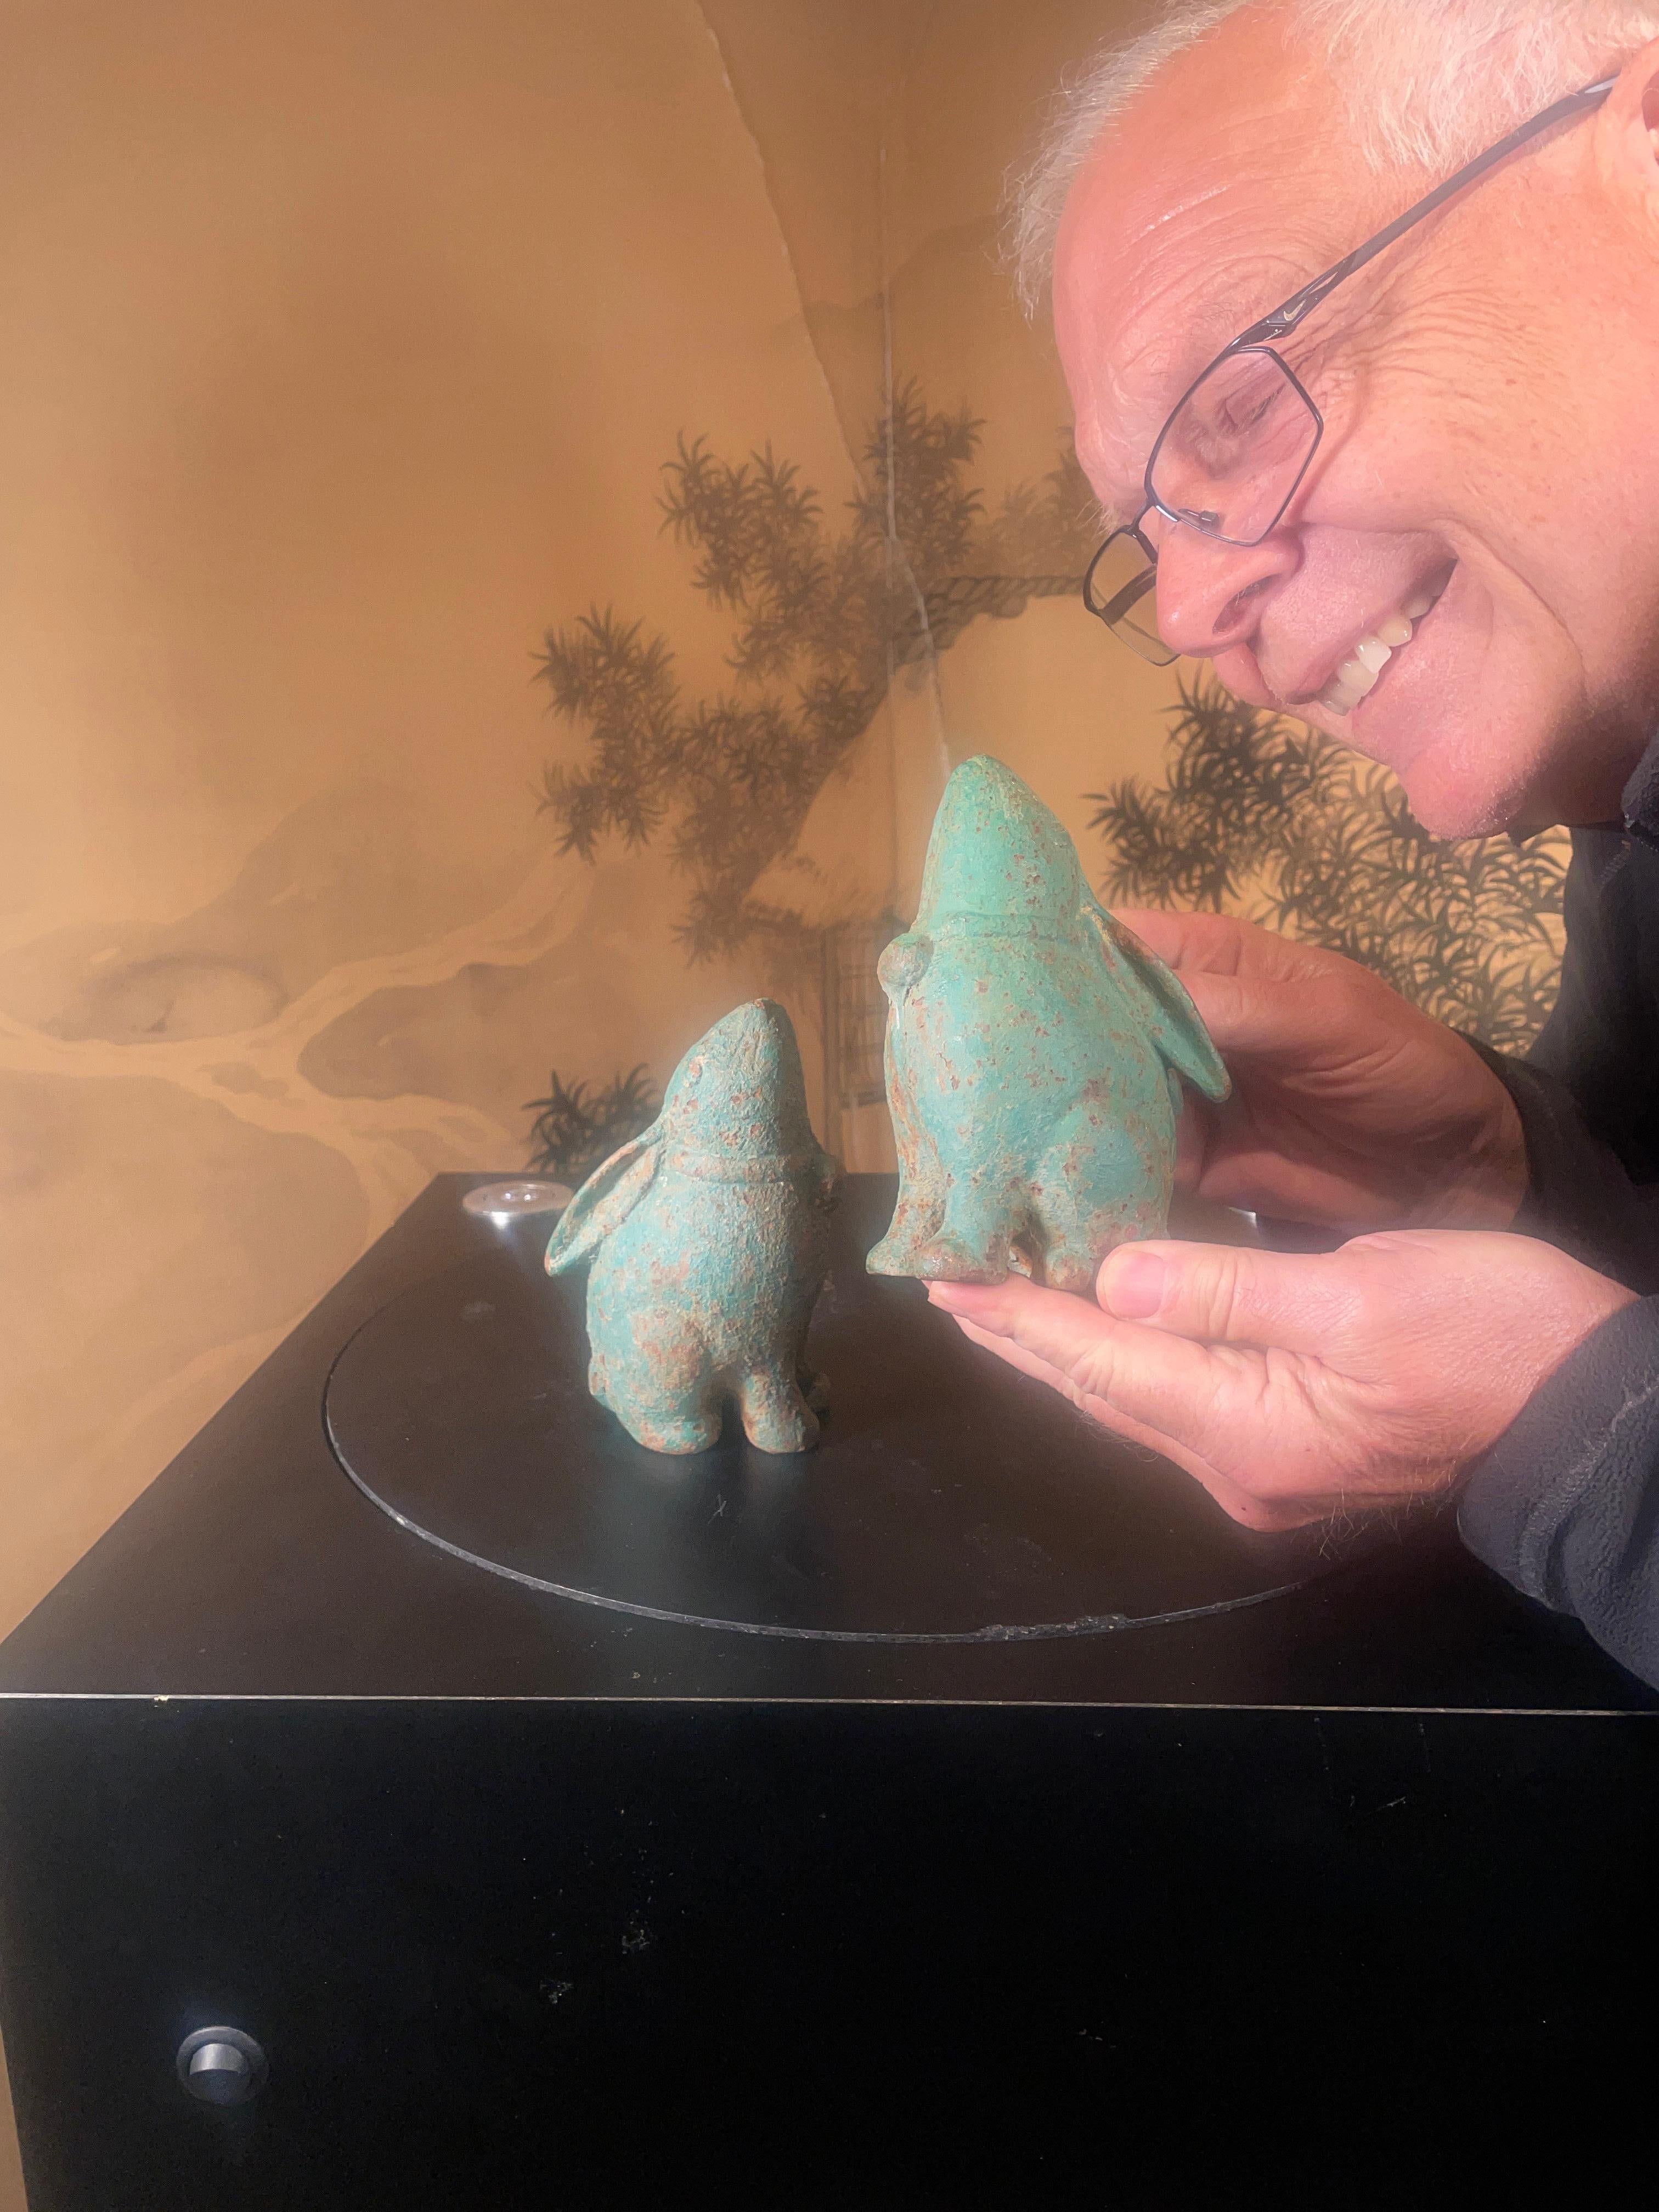 For your special garden spot - rare pair Moon Gazing Rabbits from Japan! 

This is a harder to find matching pair (2) of solid and finely cast effigies of tall 